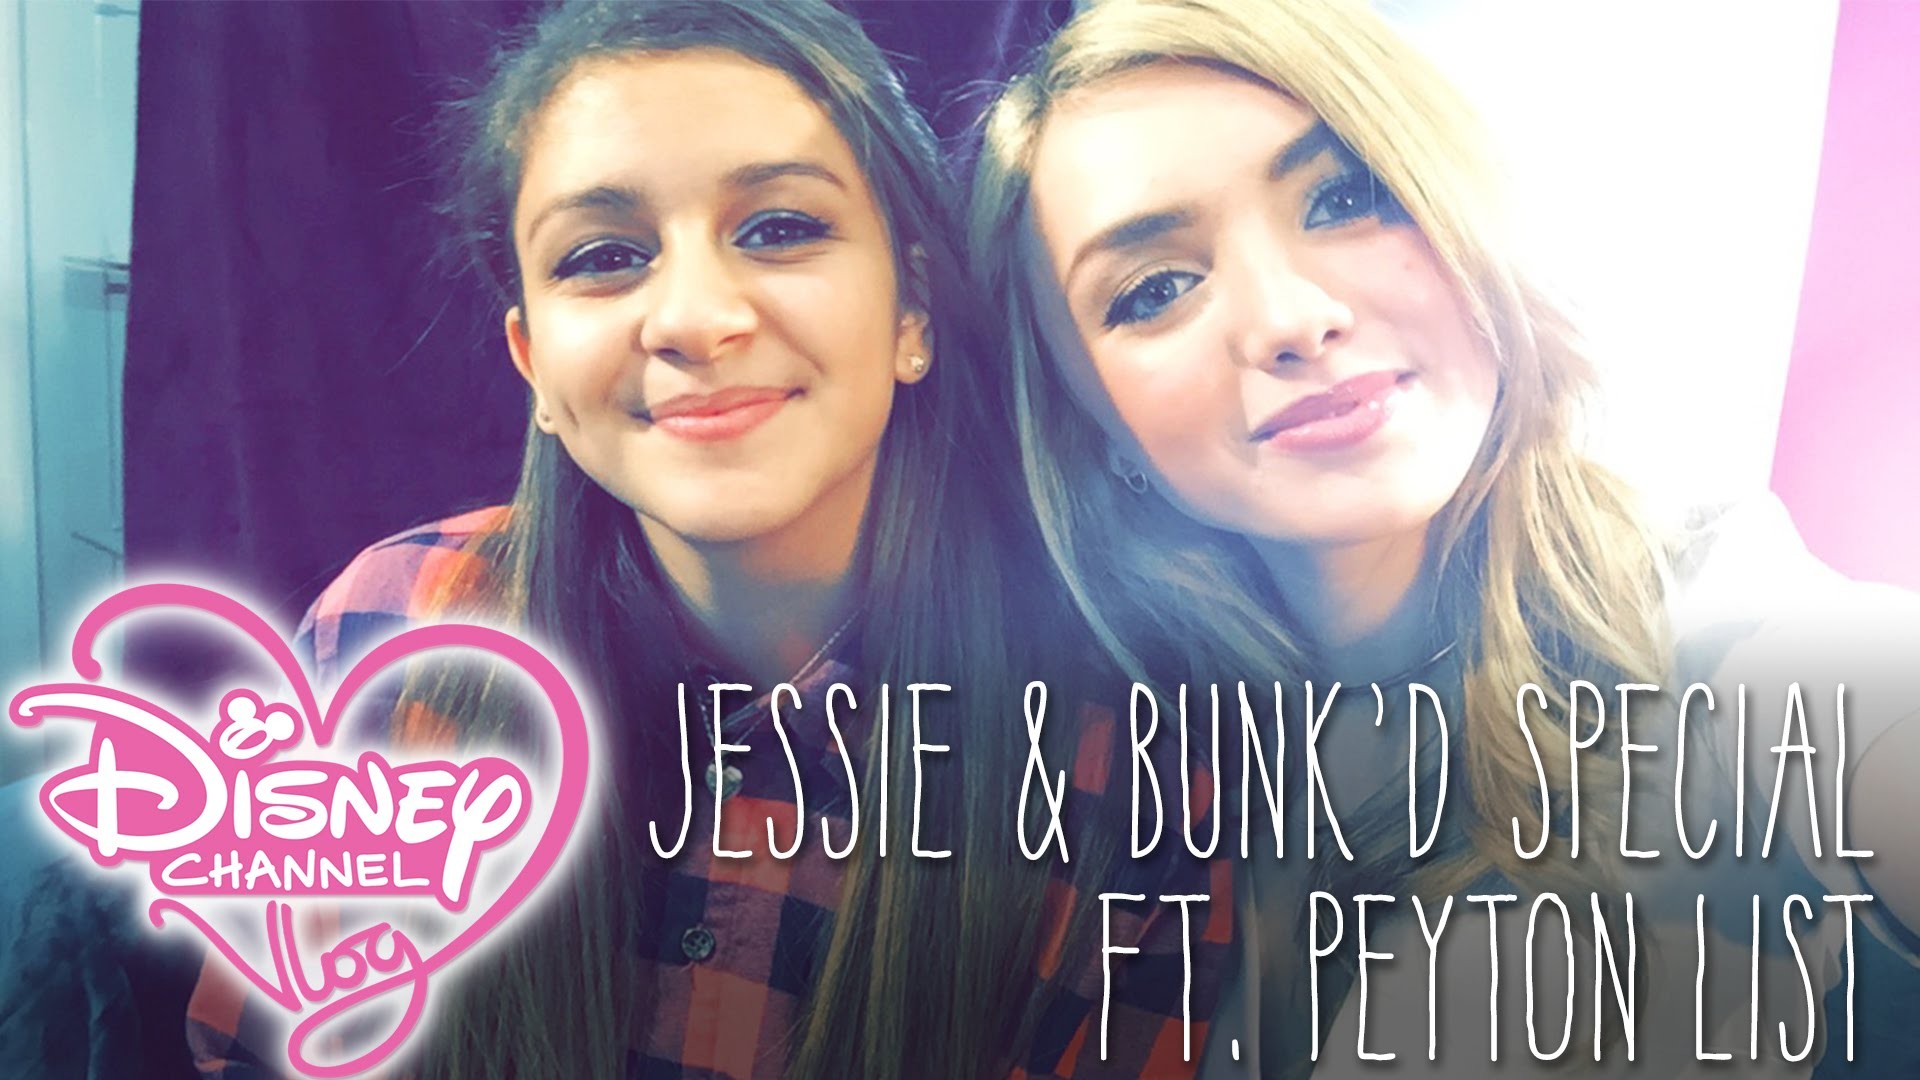 1920x1080 Jessie & Bunk'd Special ft. Peyton List | The Disney Channel Vlog #19 -  YouTube